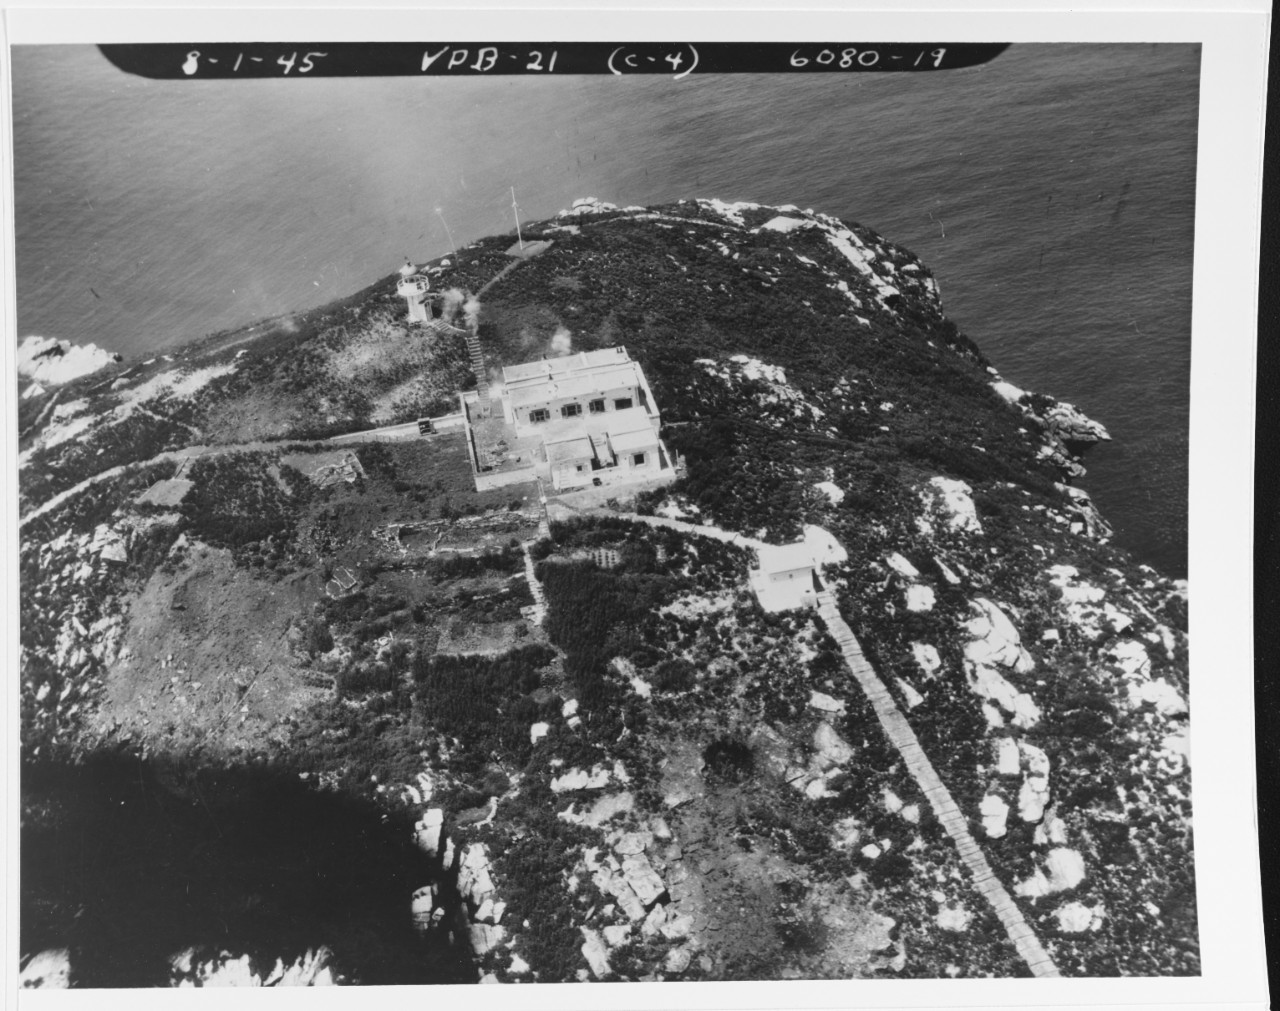 Attack on a light house, off the Kiangsu Province, China, 1 August 1945.